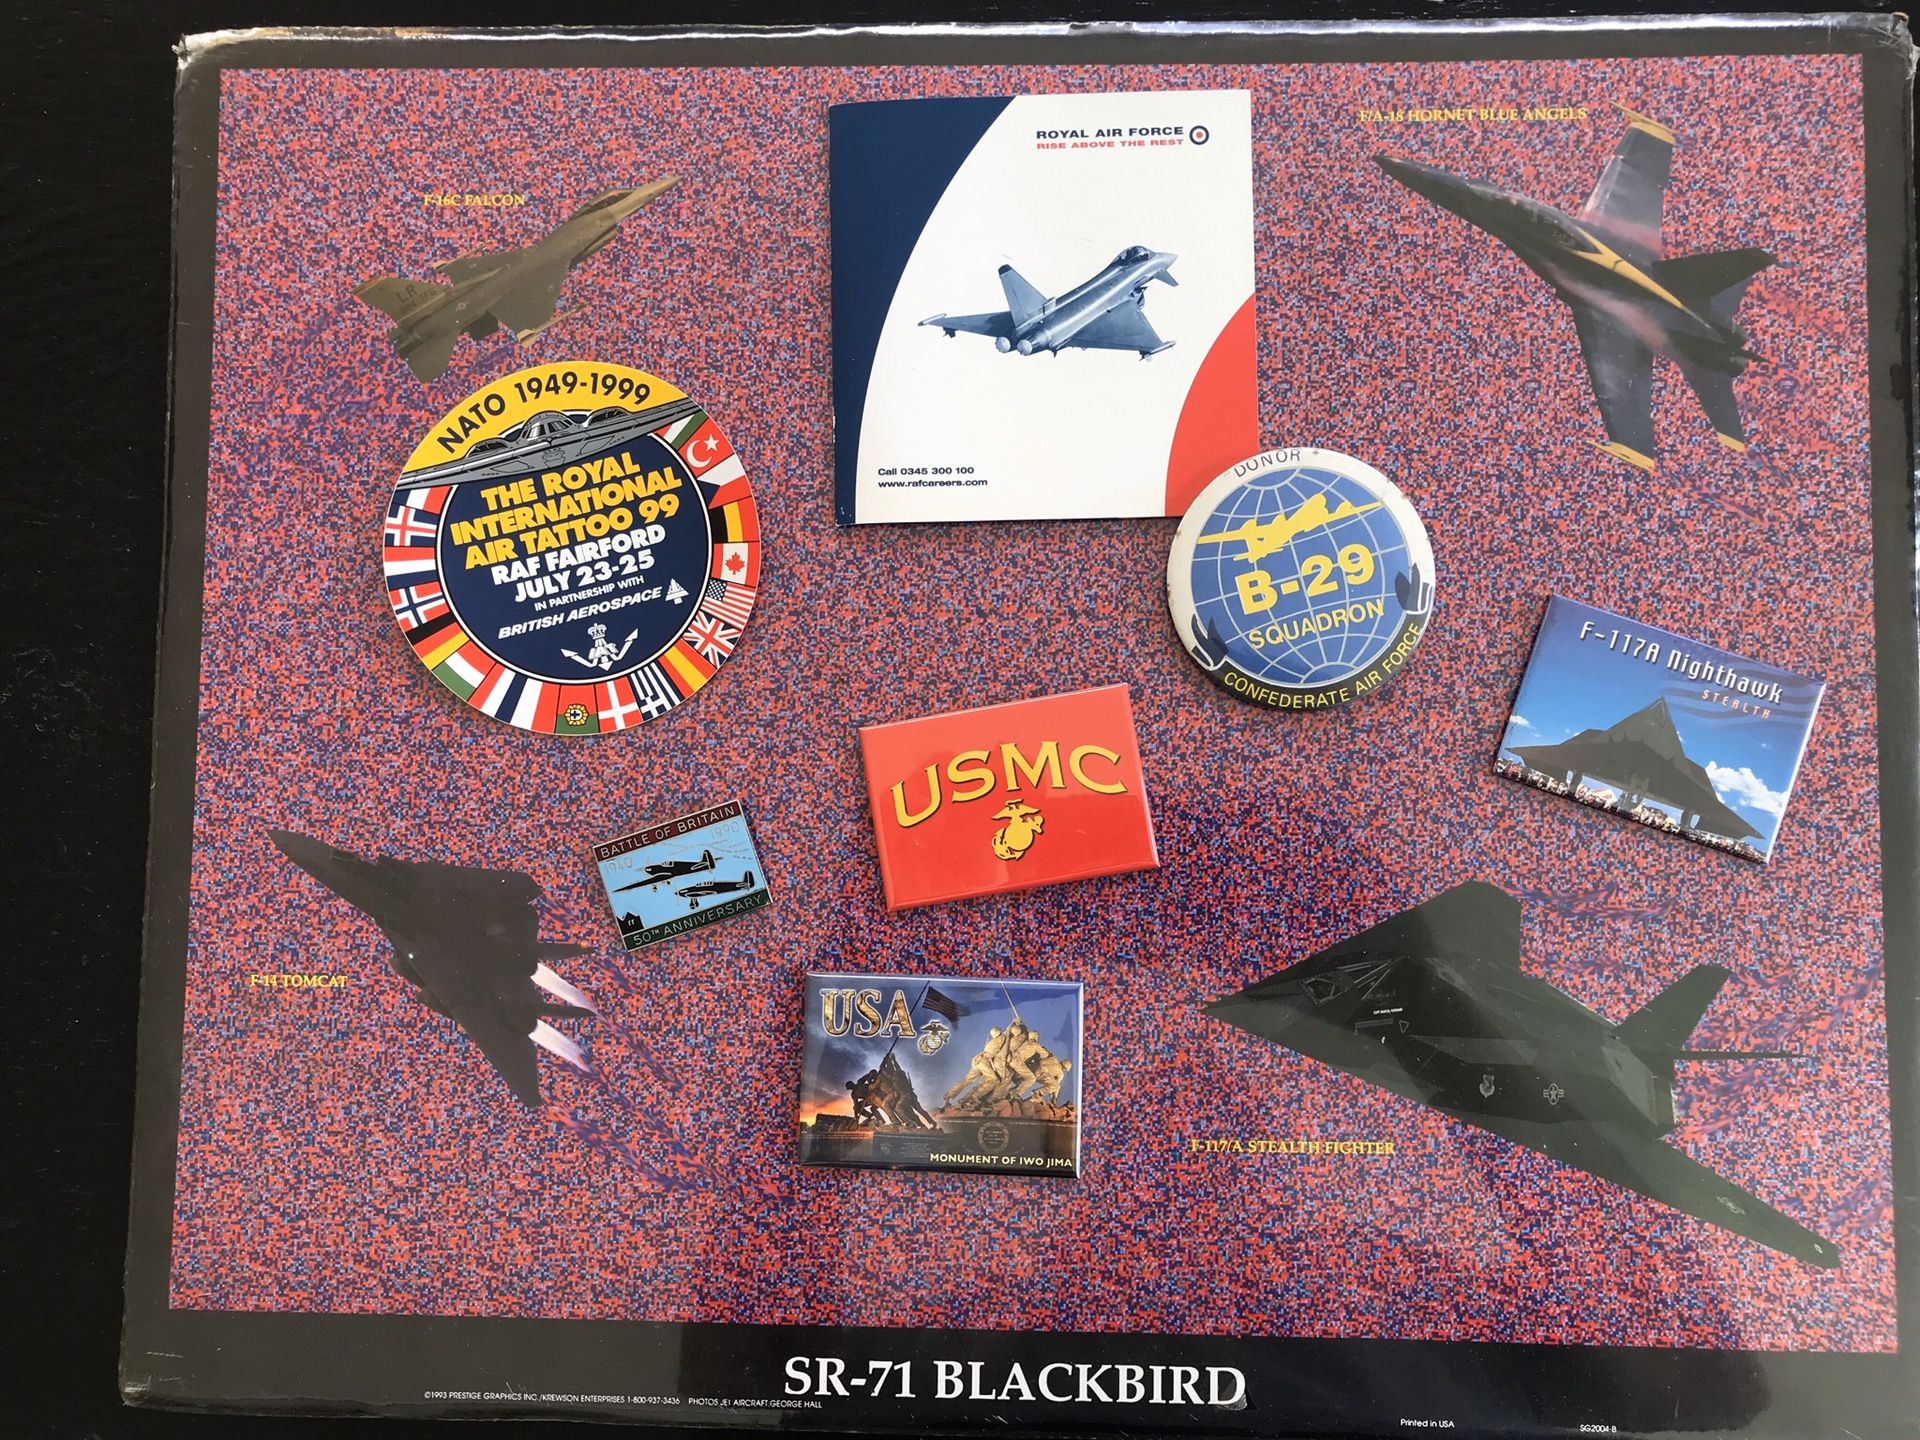 SR71 magic eye poster and miscellaneous military items, magnets etc.